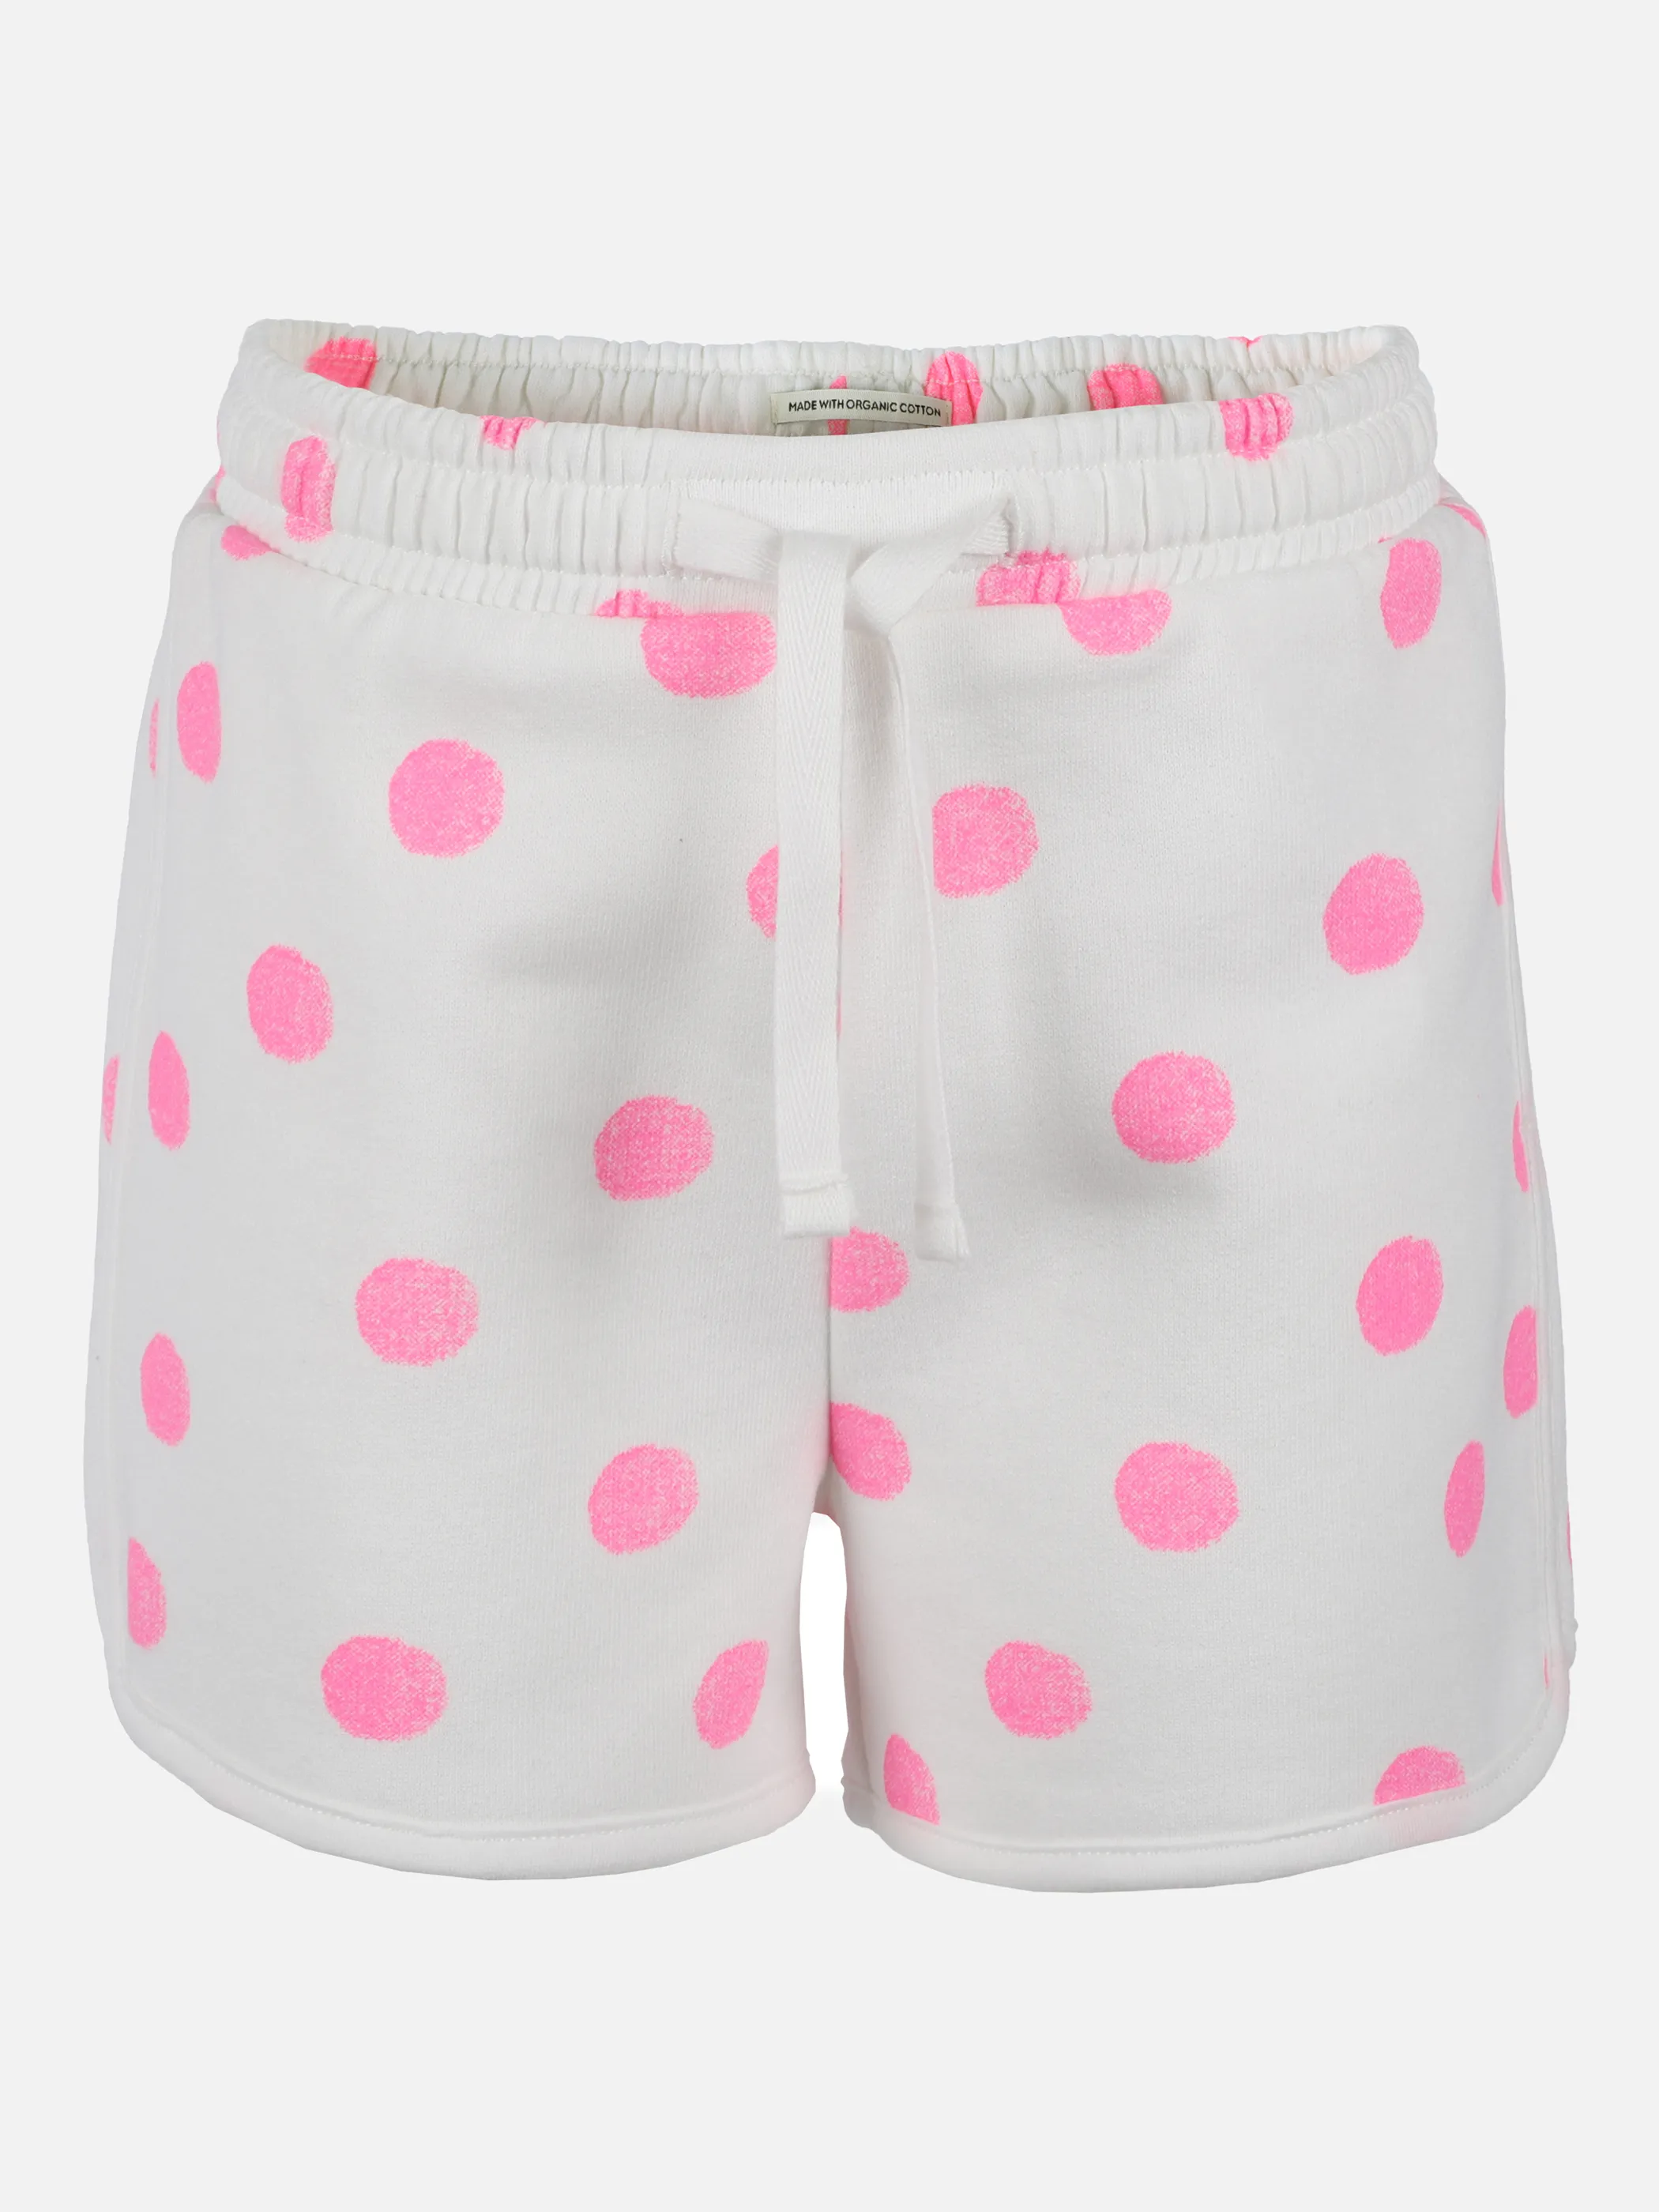 Tom Tailor 1031924 jersey shorts Pink 865852 29921 1